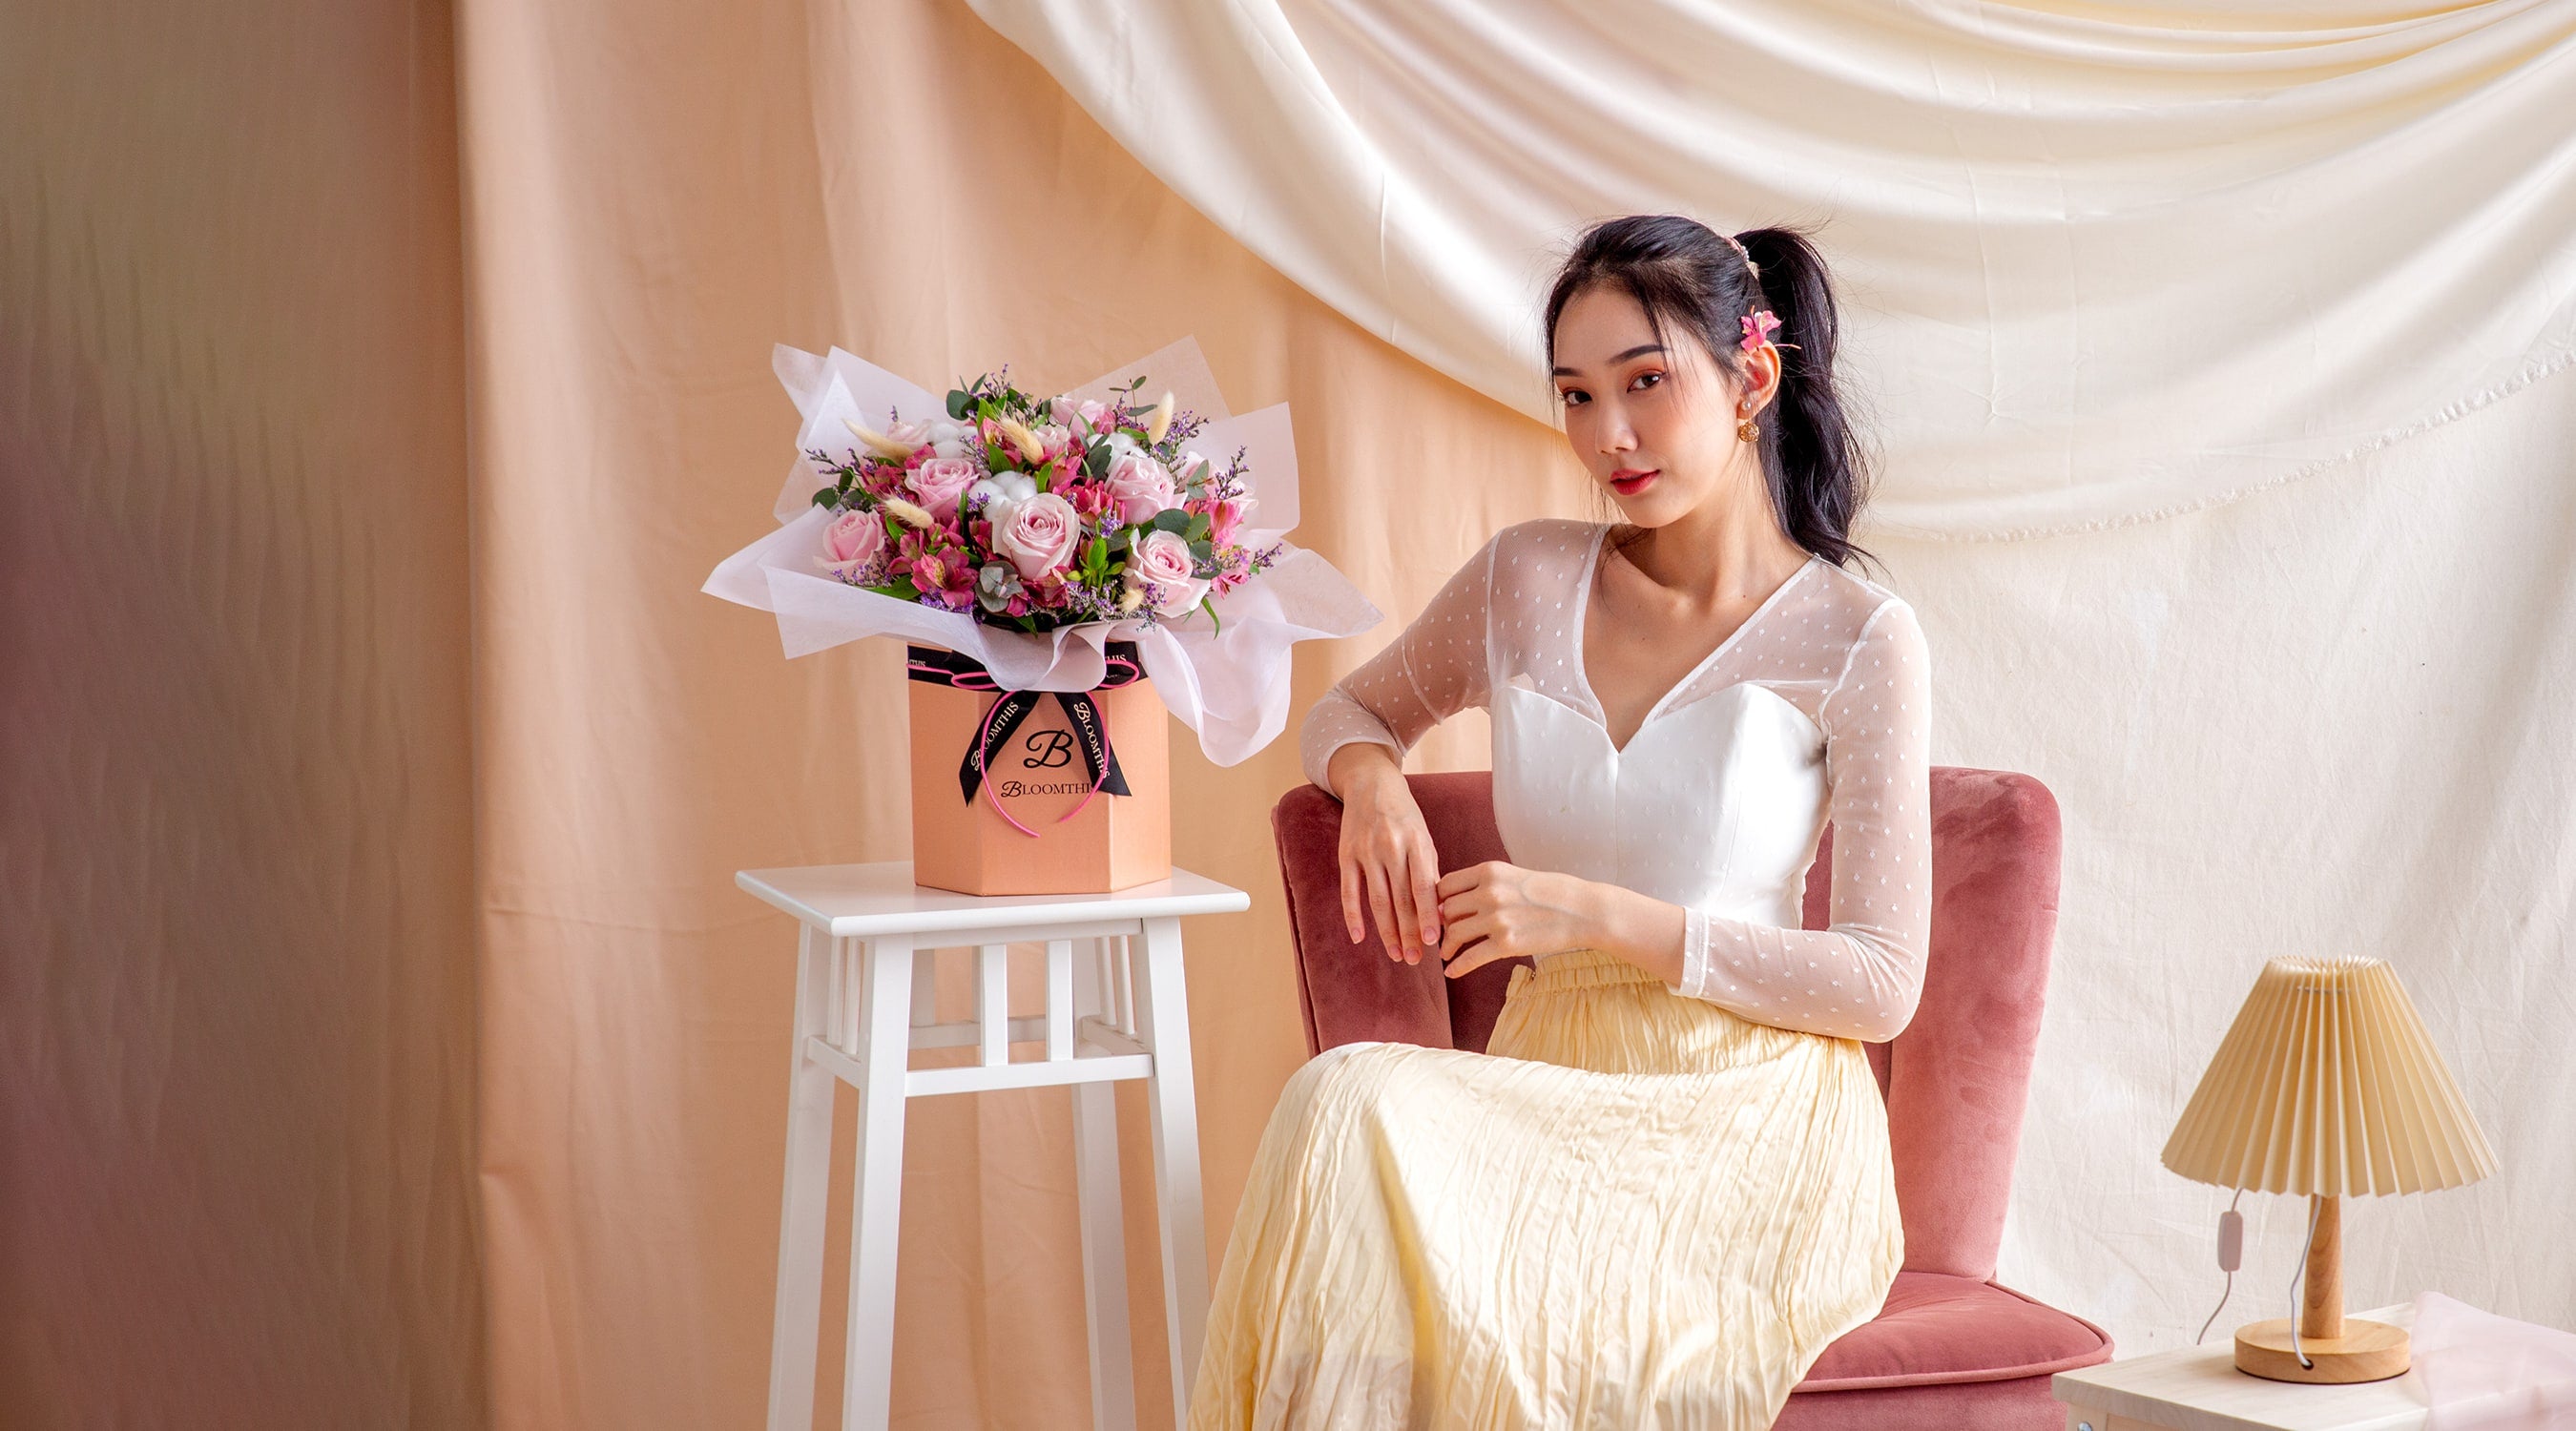 BloomThis Qixi Festival flowers & gifts